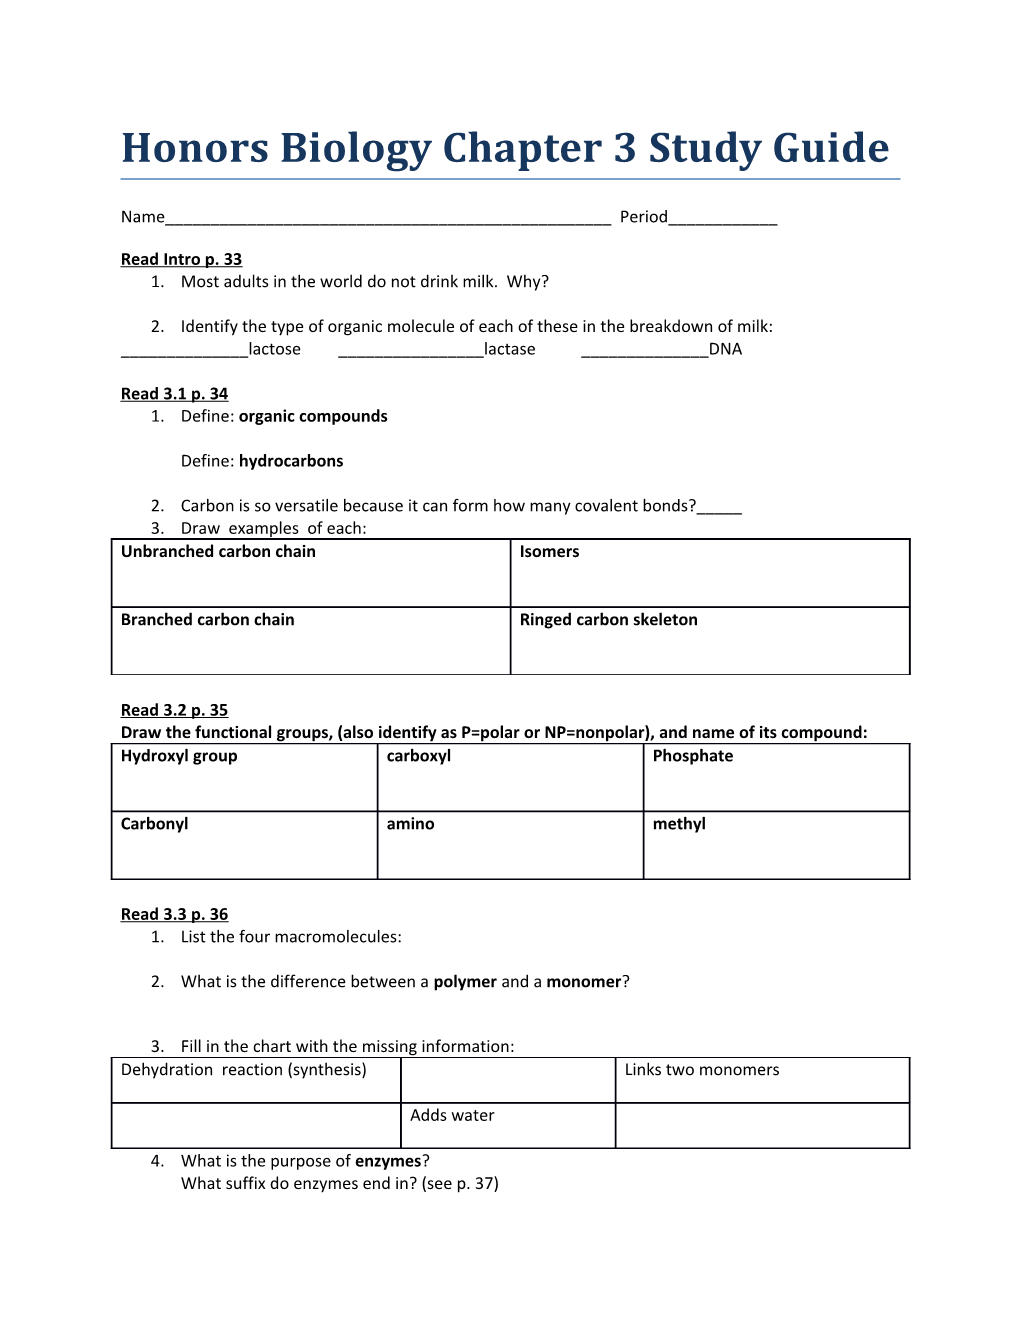 Honors Biology Chapter 3 Study Guide